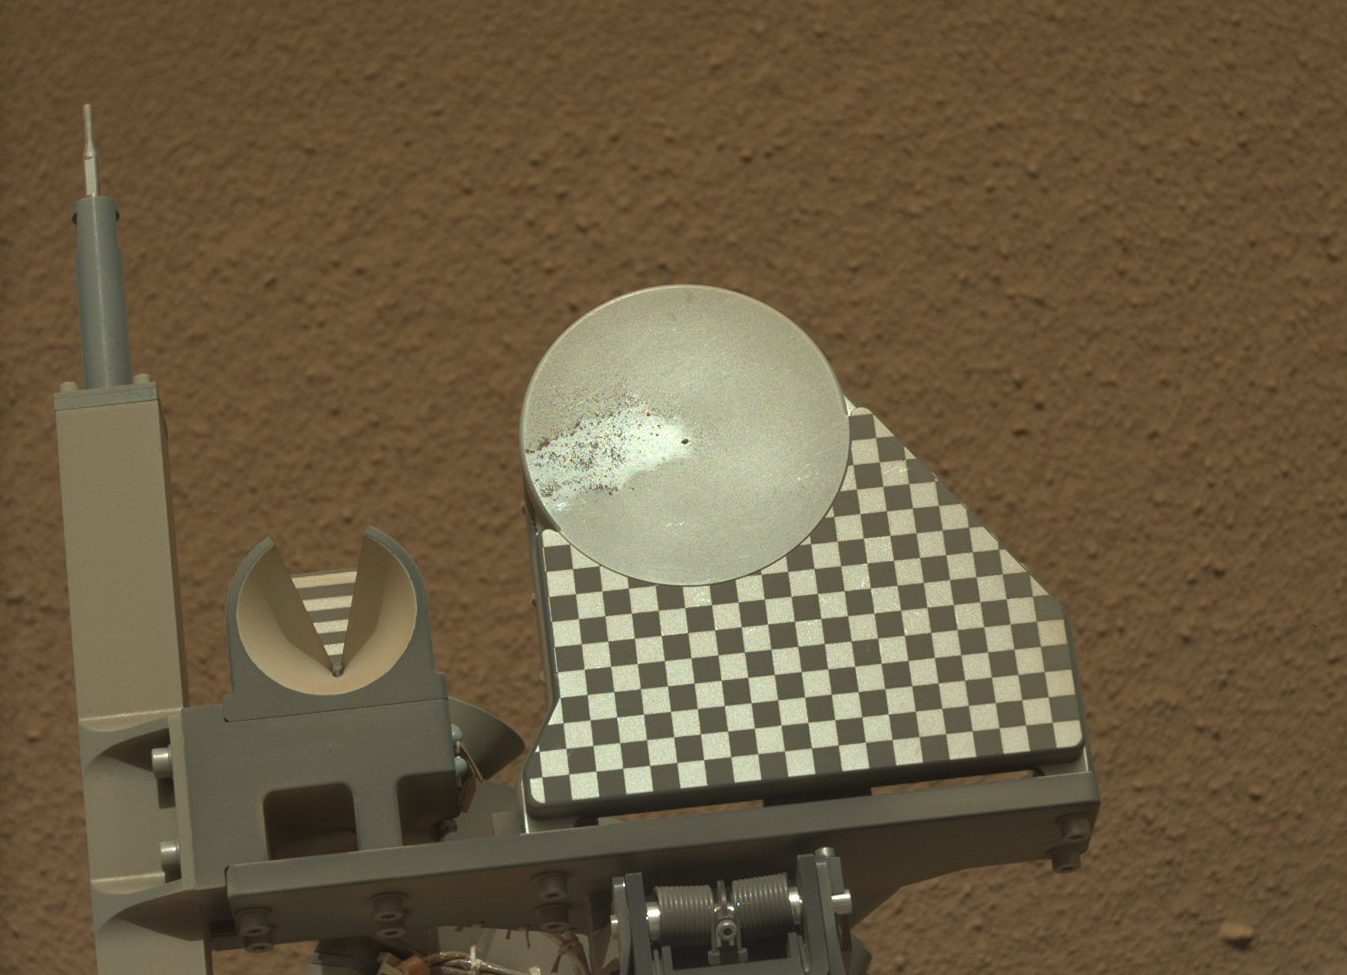 First Sample Placed on Curiosity's Observation Tray